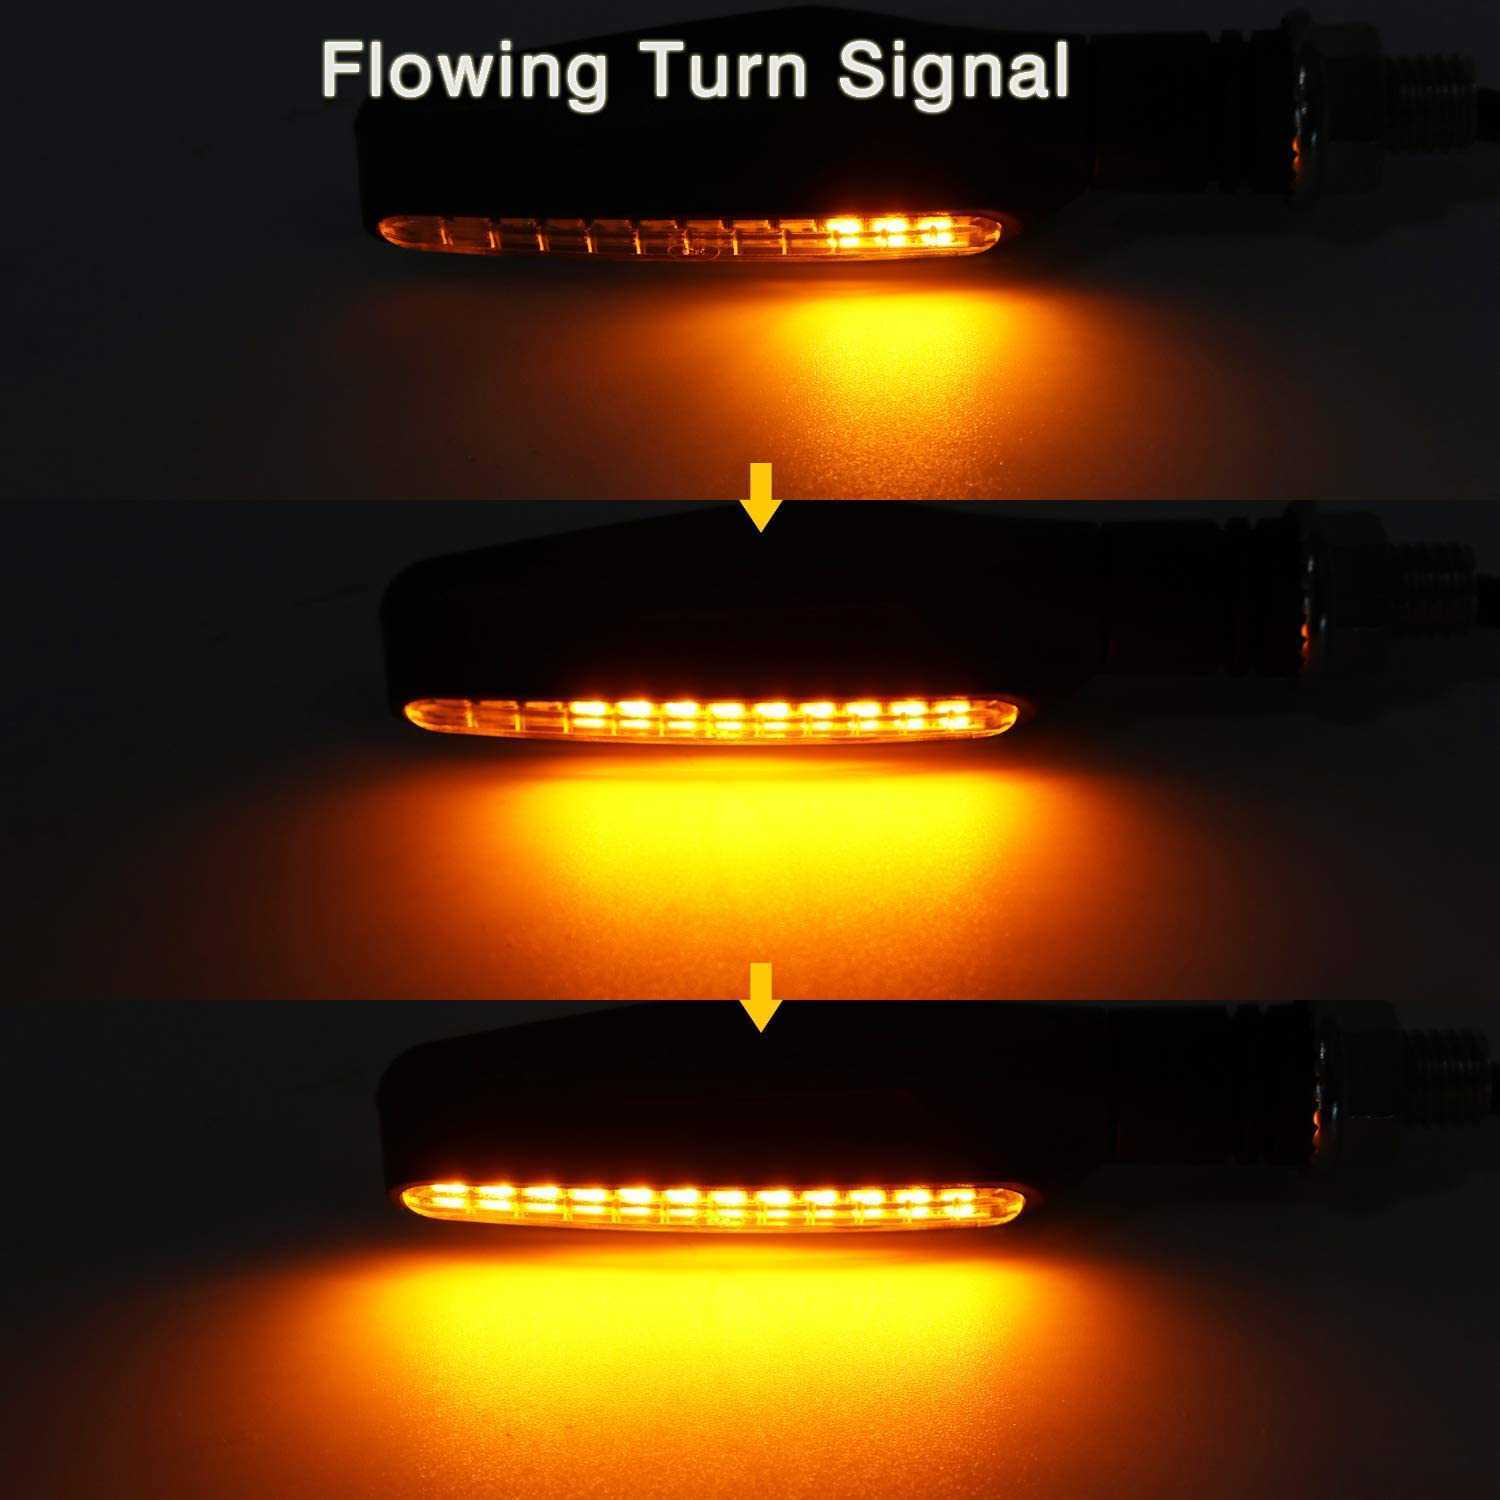 New 1/LED Motorcycle Turn Signals Light 12 SMD Tail Flasher Flowing Water Blinker IP68 Bendable Motorcycle Flashing Lights